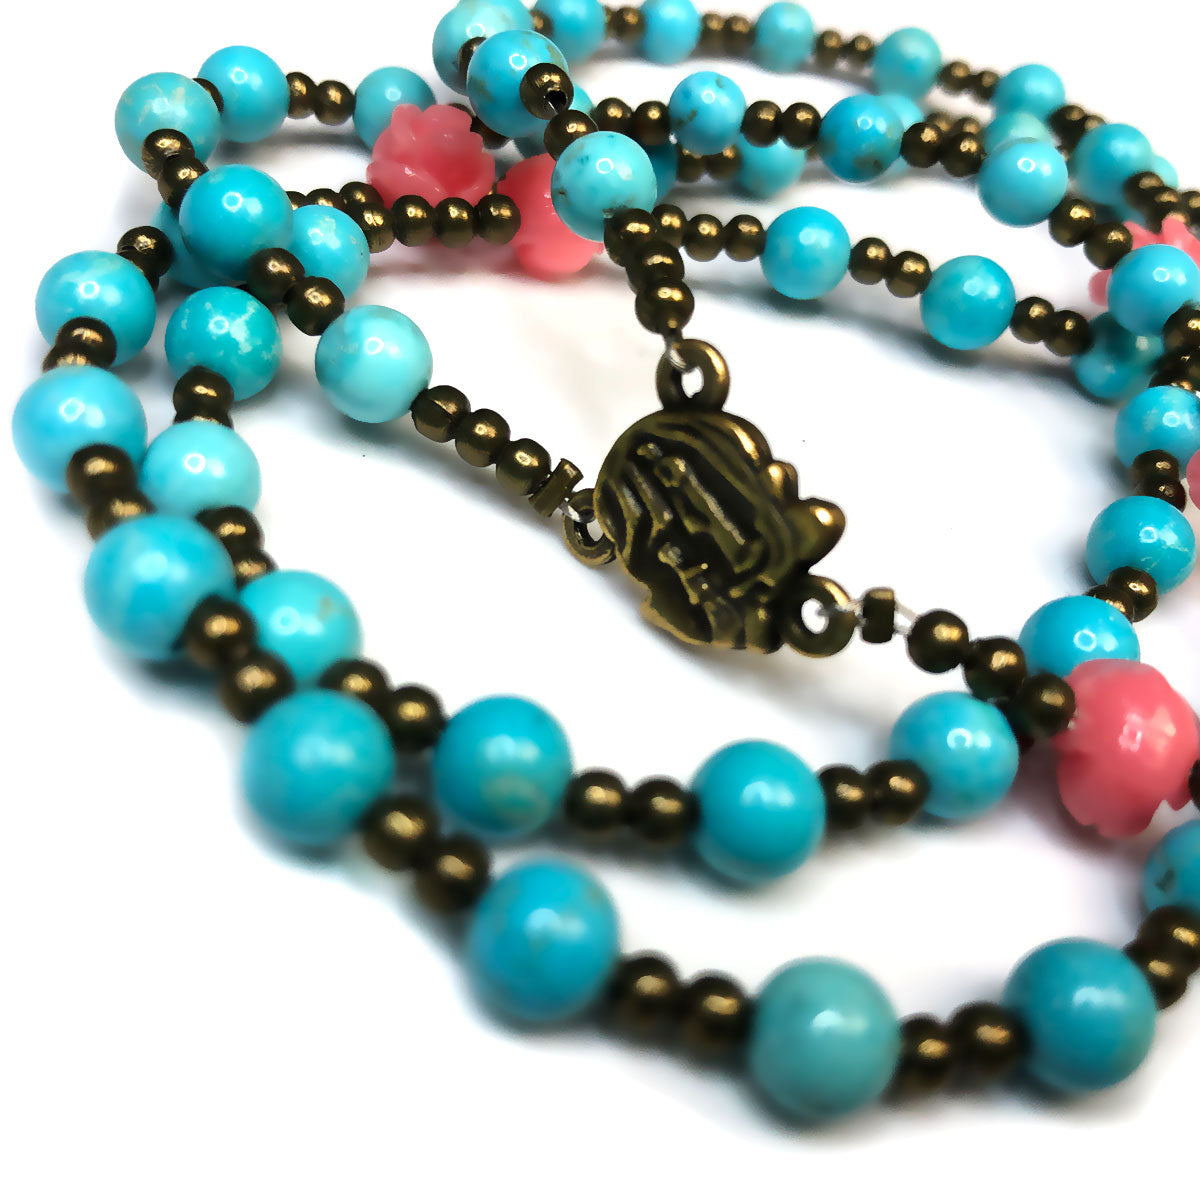 Catholic Heirlooms Our Lady Of Lourdes Turquoise Stone Pink Rose Rosary